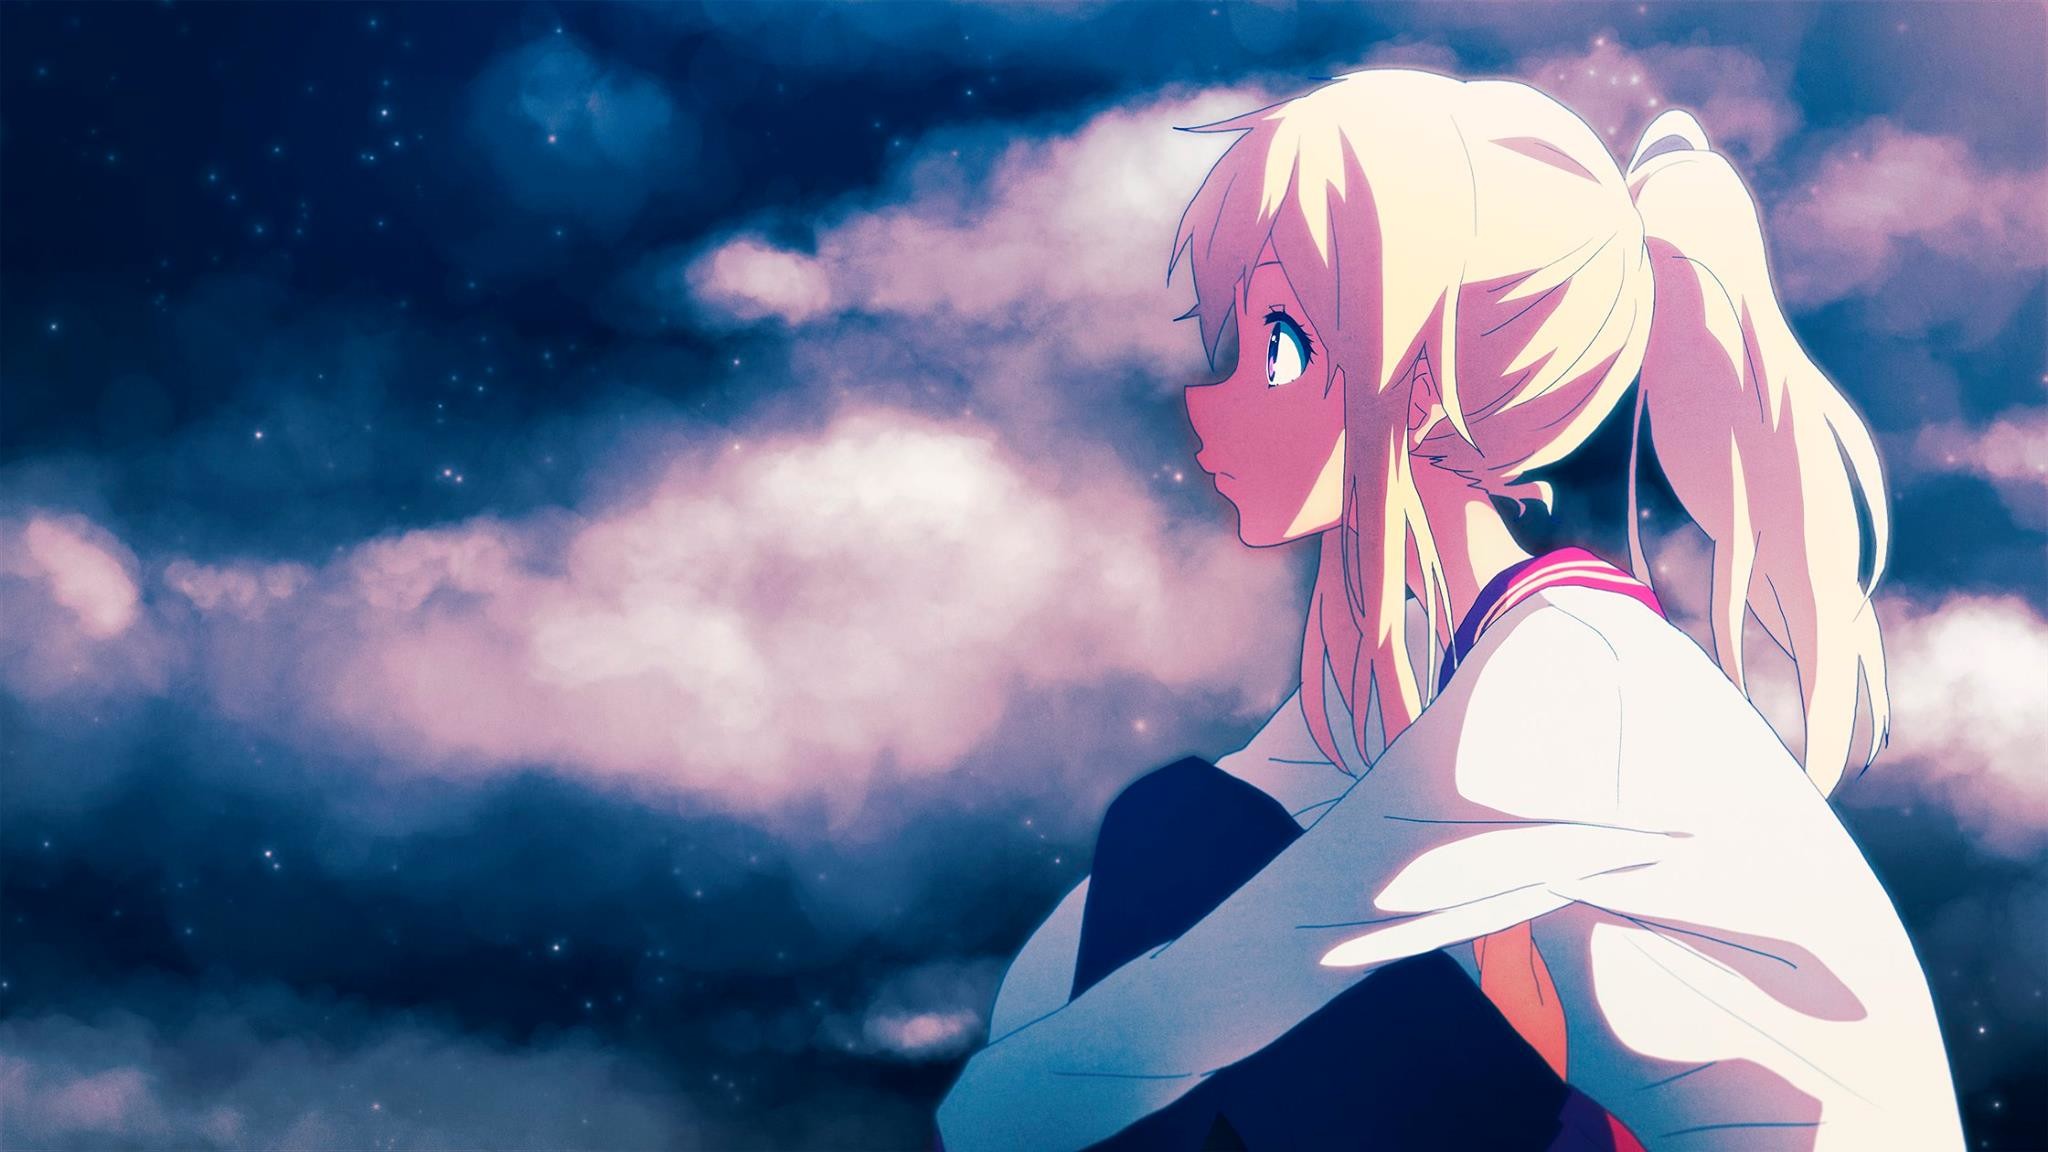 Anime – Unknown Space Anime Girl Blonde Wallpaper